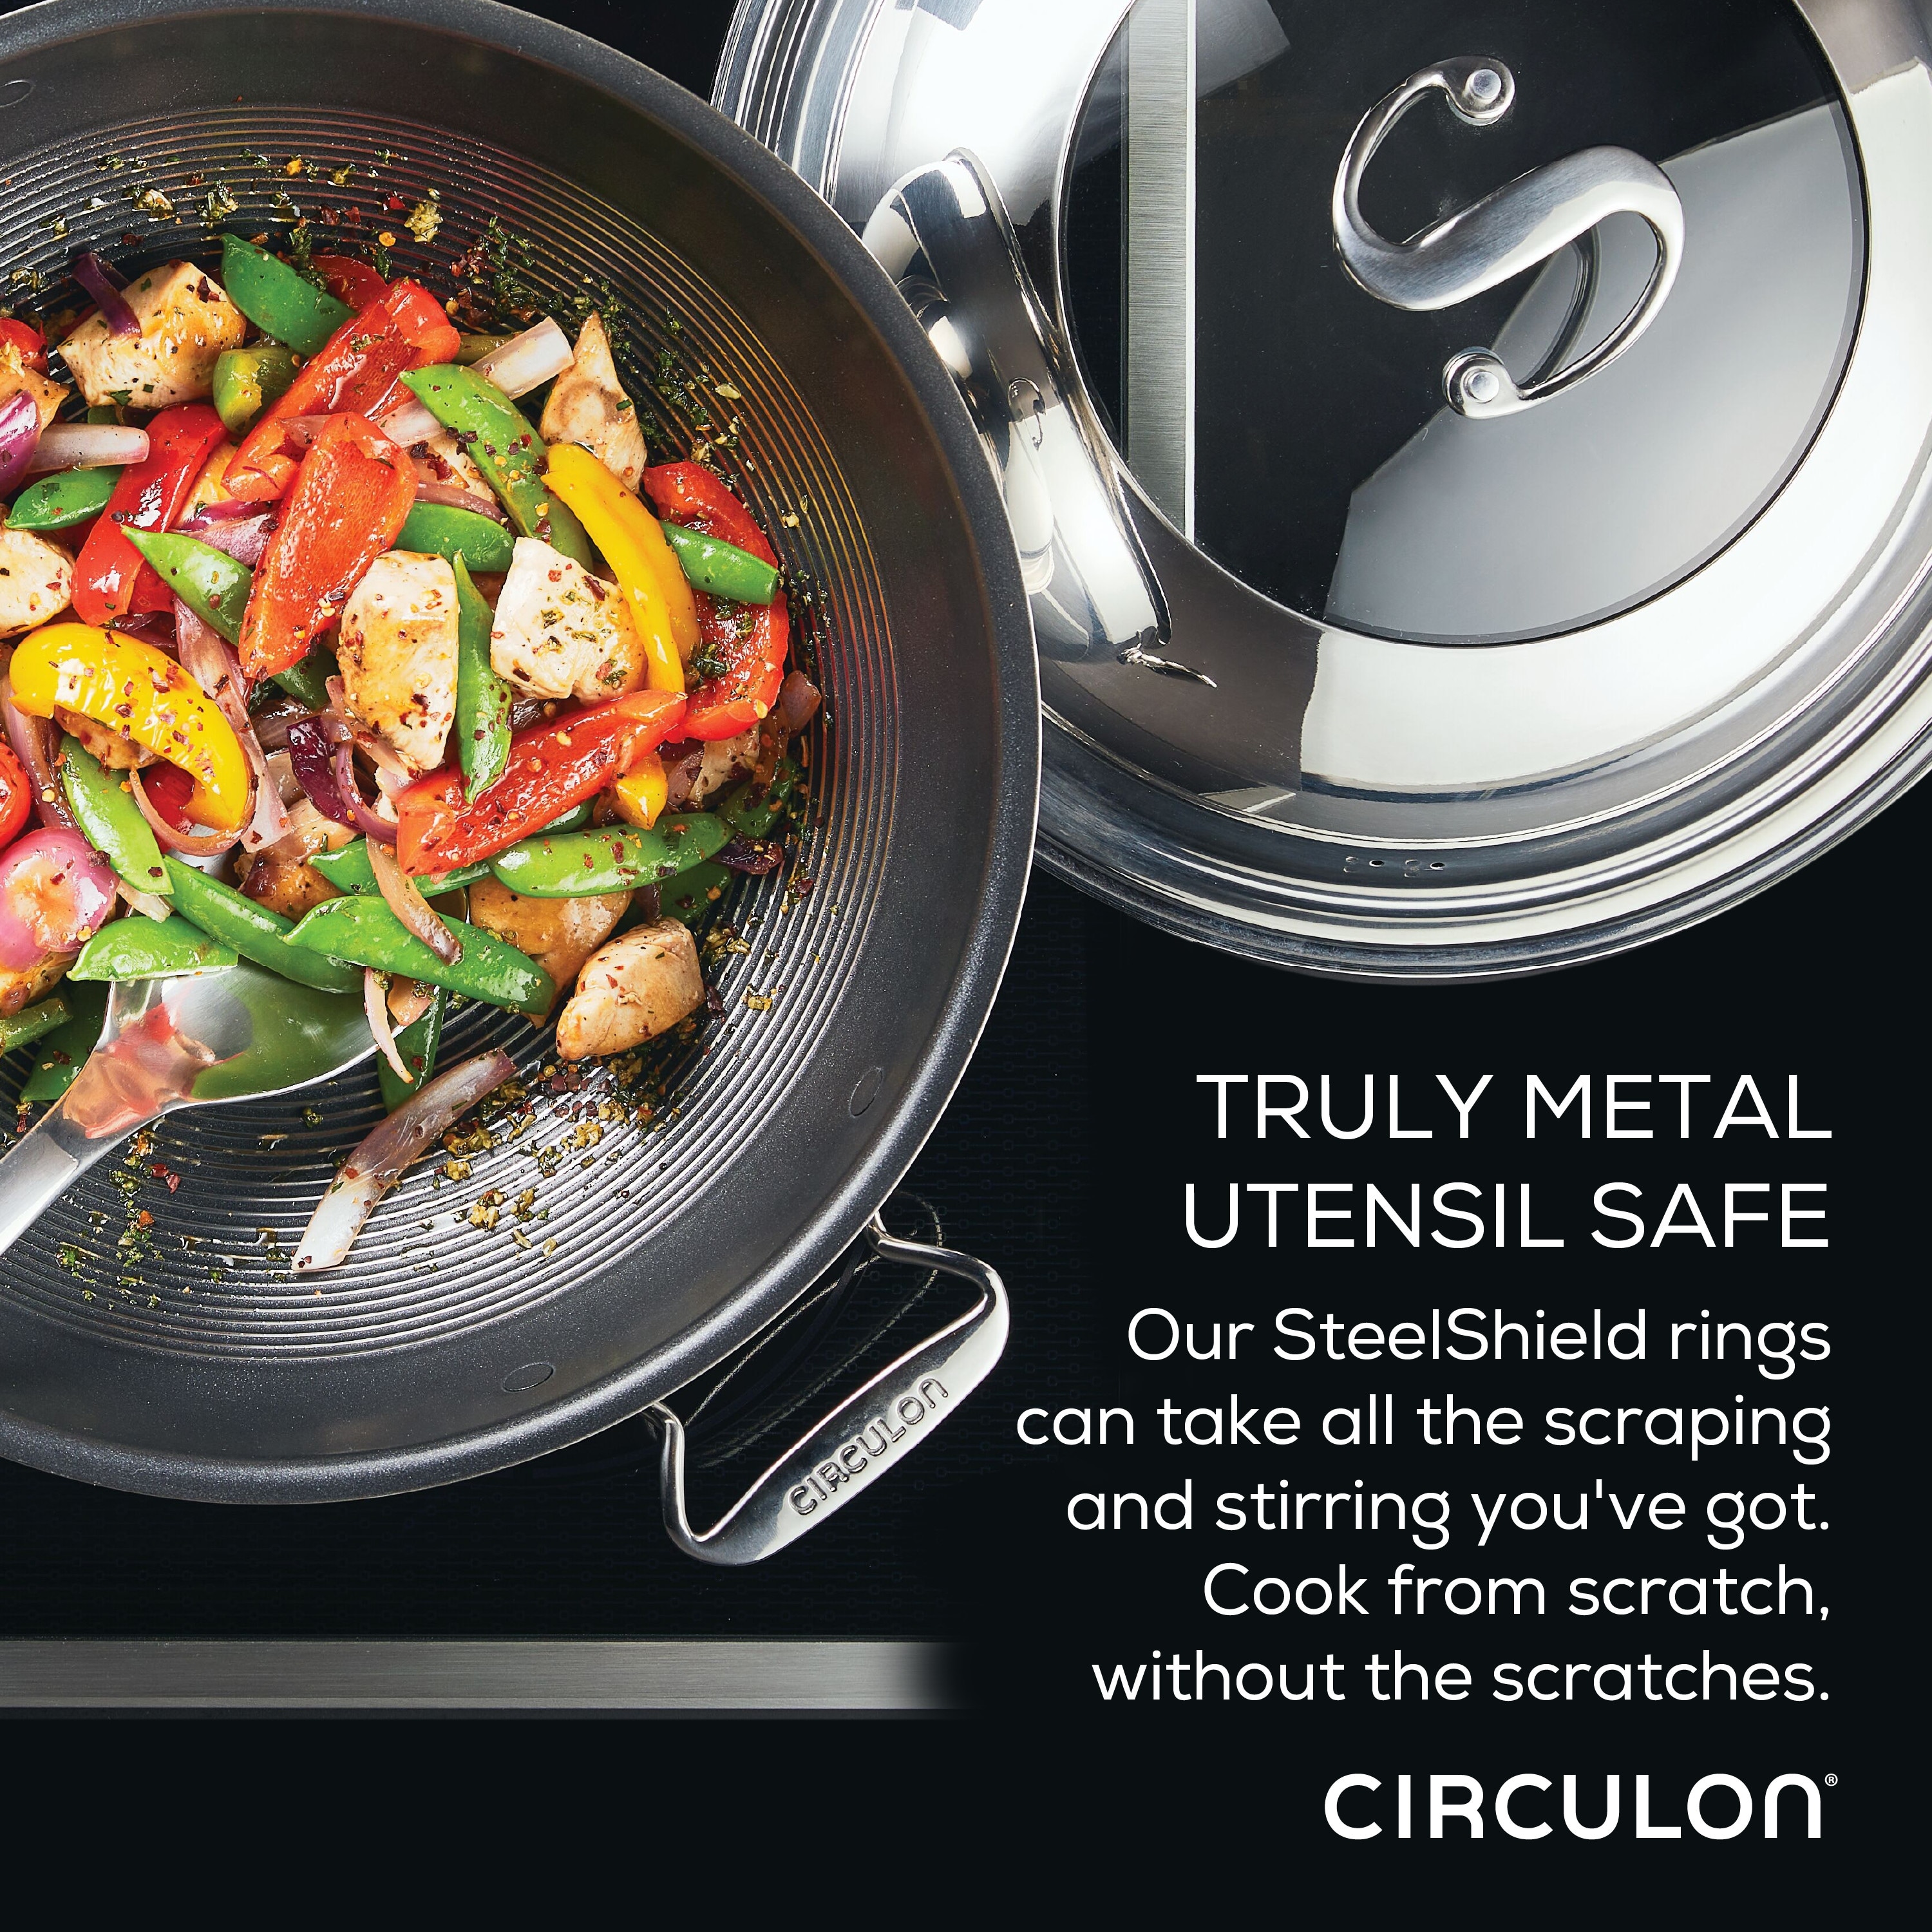 https://ak1.ostkcdn.com/images/products/is/images/direct/c72d4619dd541adc75d36b5d17147bd97d03286f/Circulon-Clad-Stainless-Steel-Induction-Wok-with-Glass-Lid-and-Hybrid-SteelShield-and-Nonstick-Technology%2C-14-Inch%2C-Silver.jpg